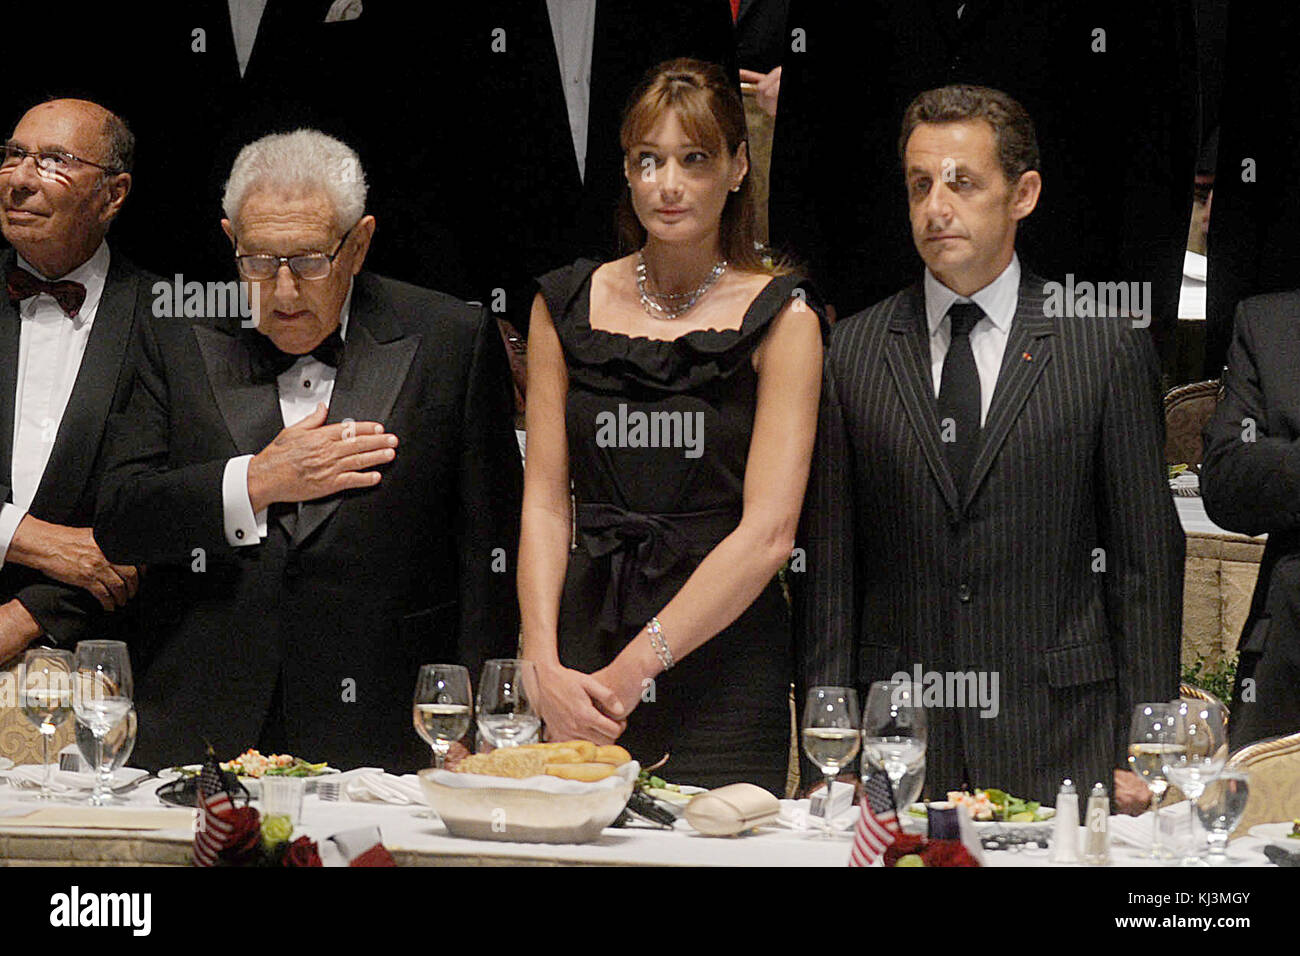 NEW YORK - SEPTEMBER 23: French President Nicolas Sarkozy, wife Carla Bruni Sarkozy and former Secretary of State Henry Kissinger attend the 2008 Appeal of Conscience Foundation awards dinner at the Waldorf-Astoria hotel September 23, 2008 in New York City. Sarkozy was presented with the Appeal of Conscience World Statesman Award for 'his leadership in advancing freedom, tolerance and inter-religious understanding  People:  Henry Kissinger, Nicolas Sarkozy, Carla Bruni Sarkozy Stock Photo